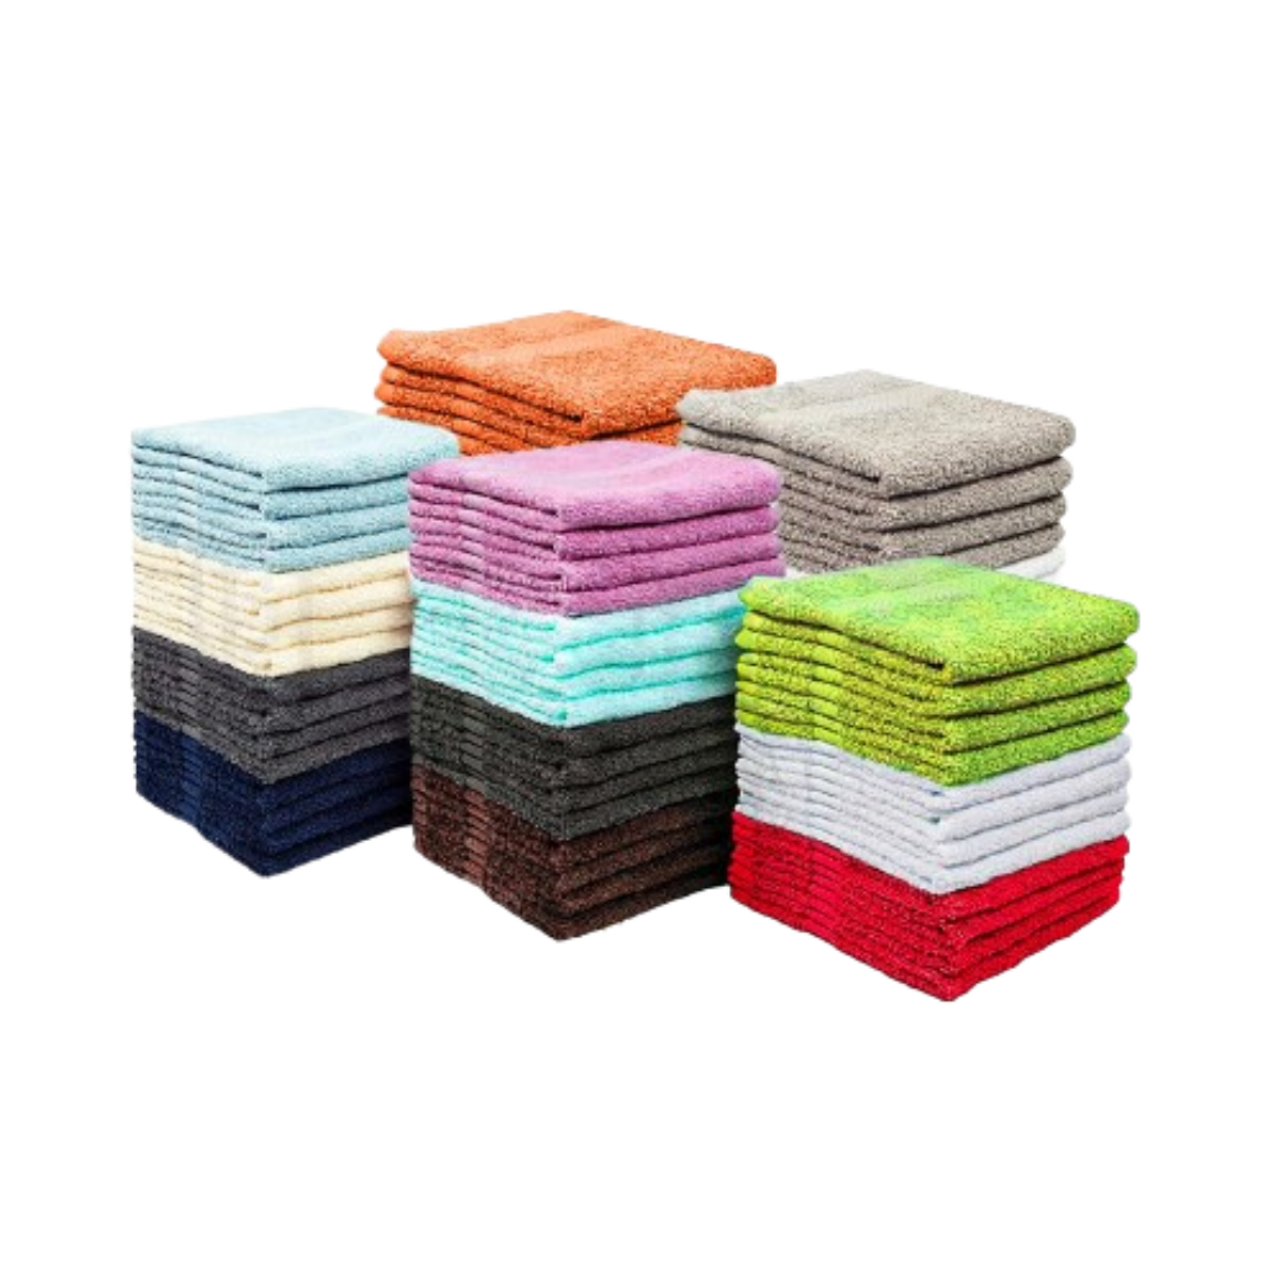 100% Cotton Absorbent Super Soft Washcloths (24-Pack) product image